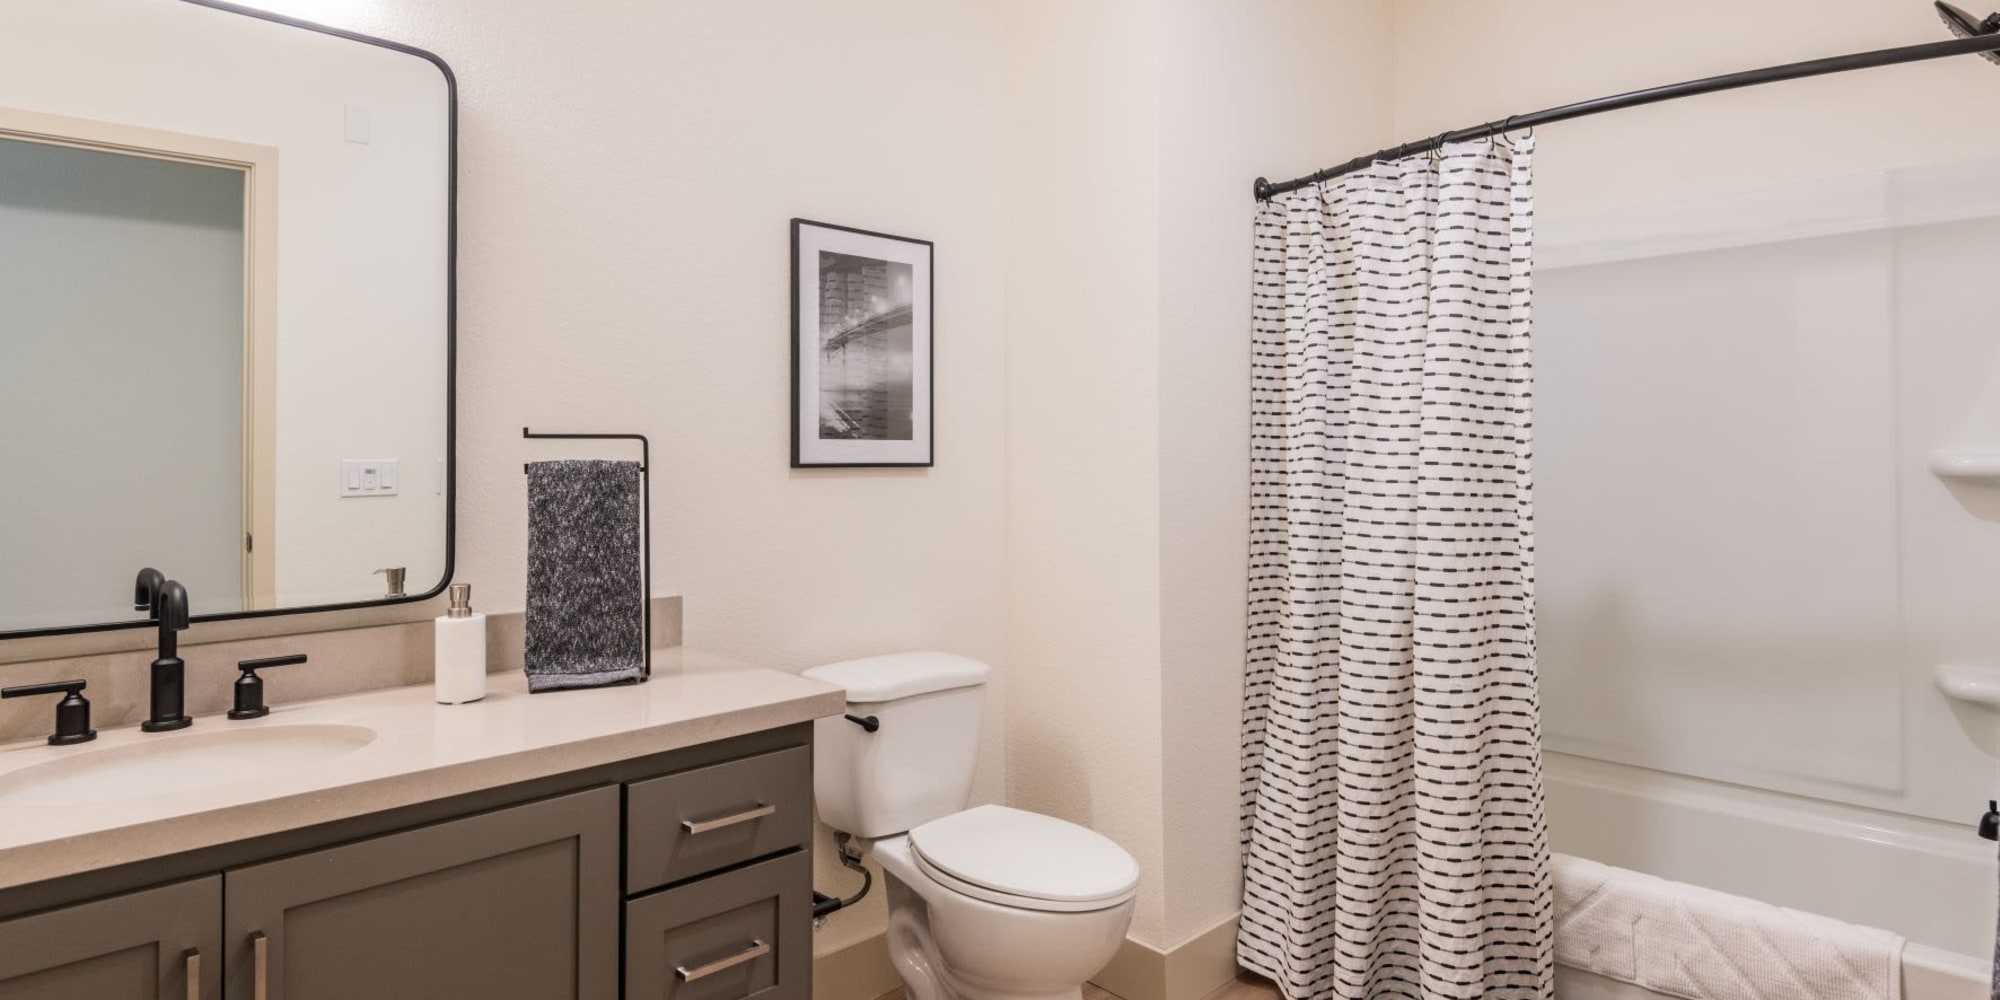 Bathroom with tub and shower at Towne Centre Apartments in Lathrop, California